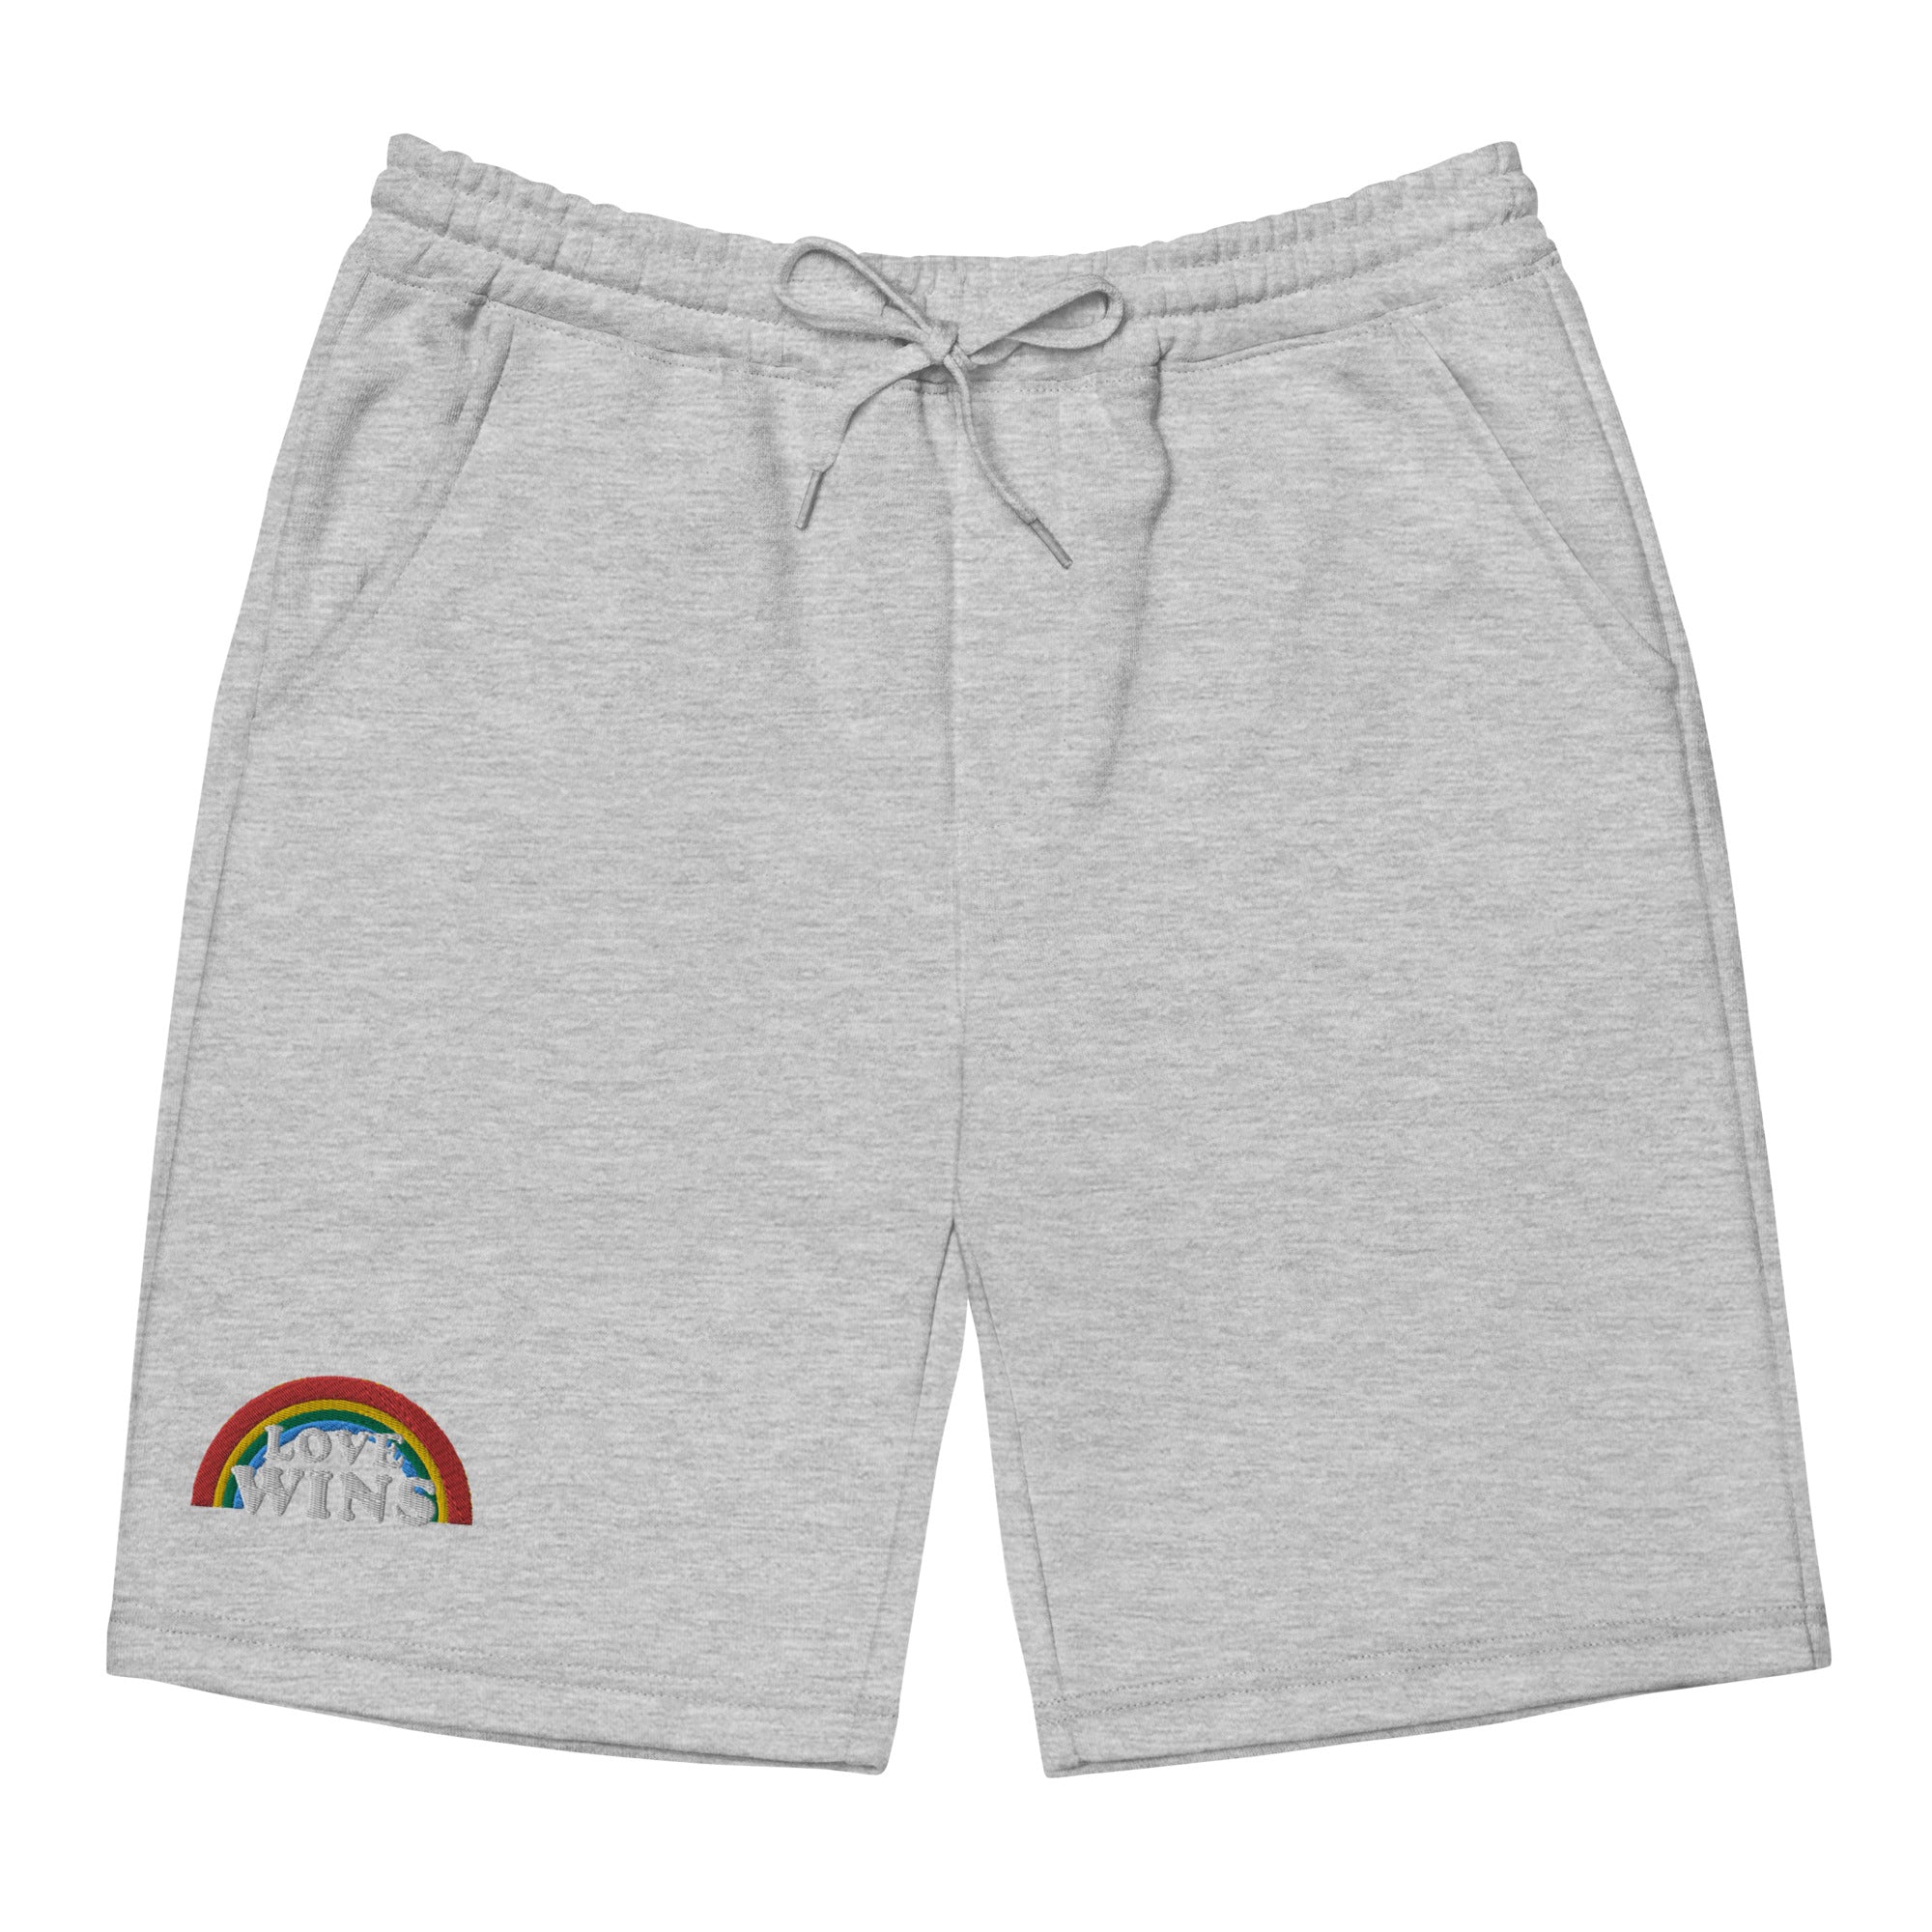 Y'all Mean's All Gay Pride Men's shorts - Rose Gold Co. Shop